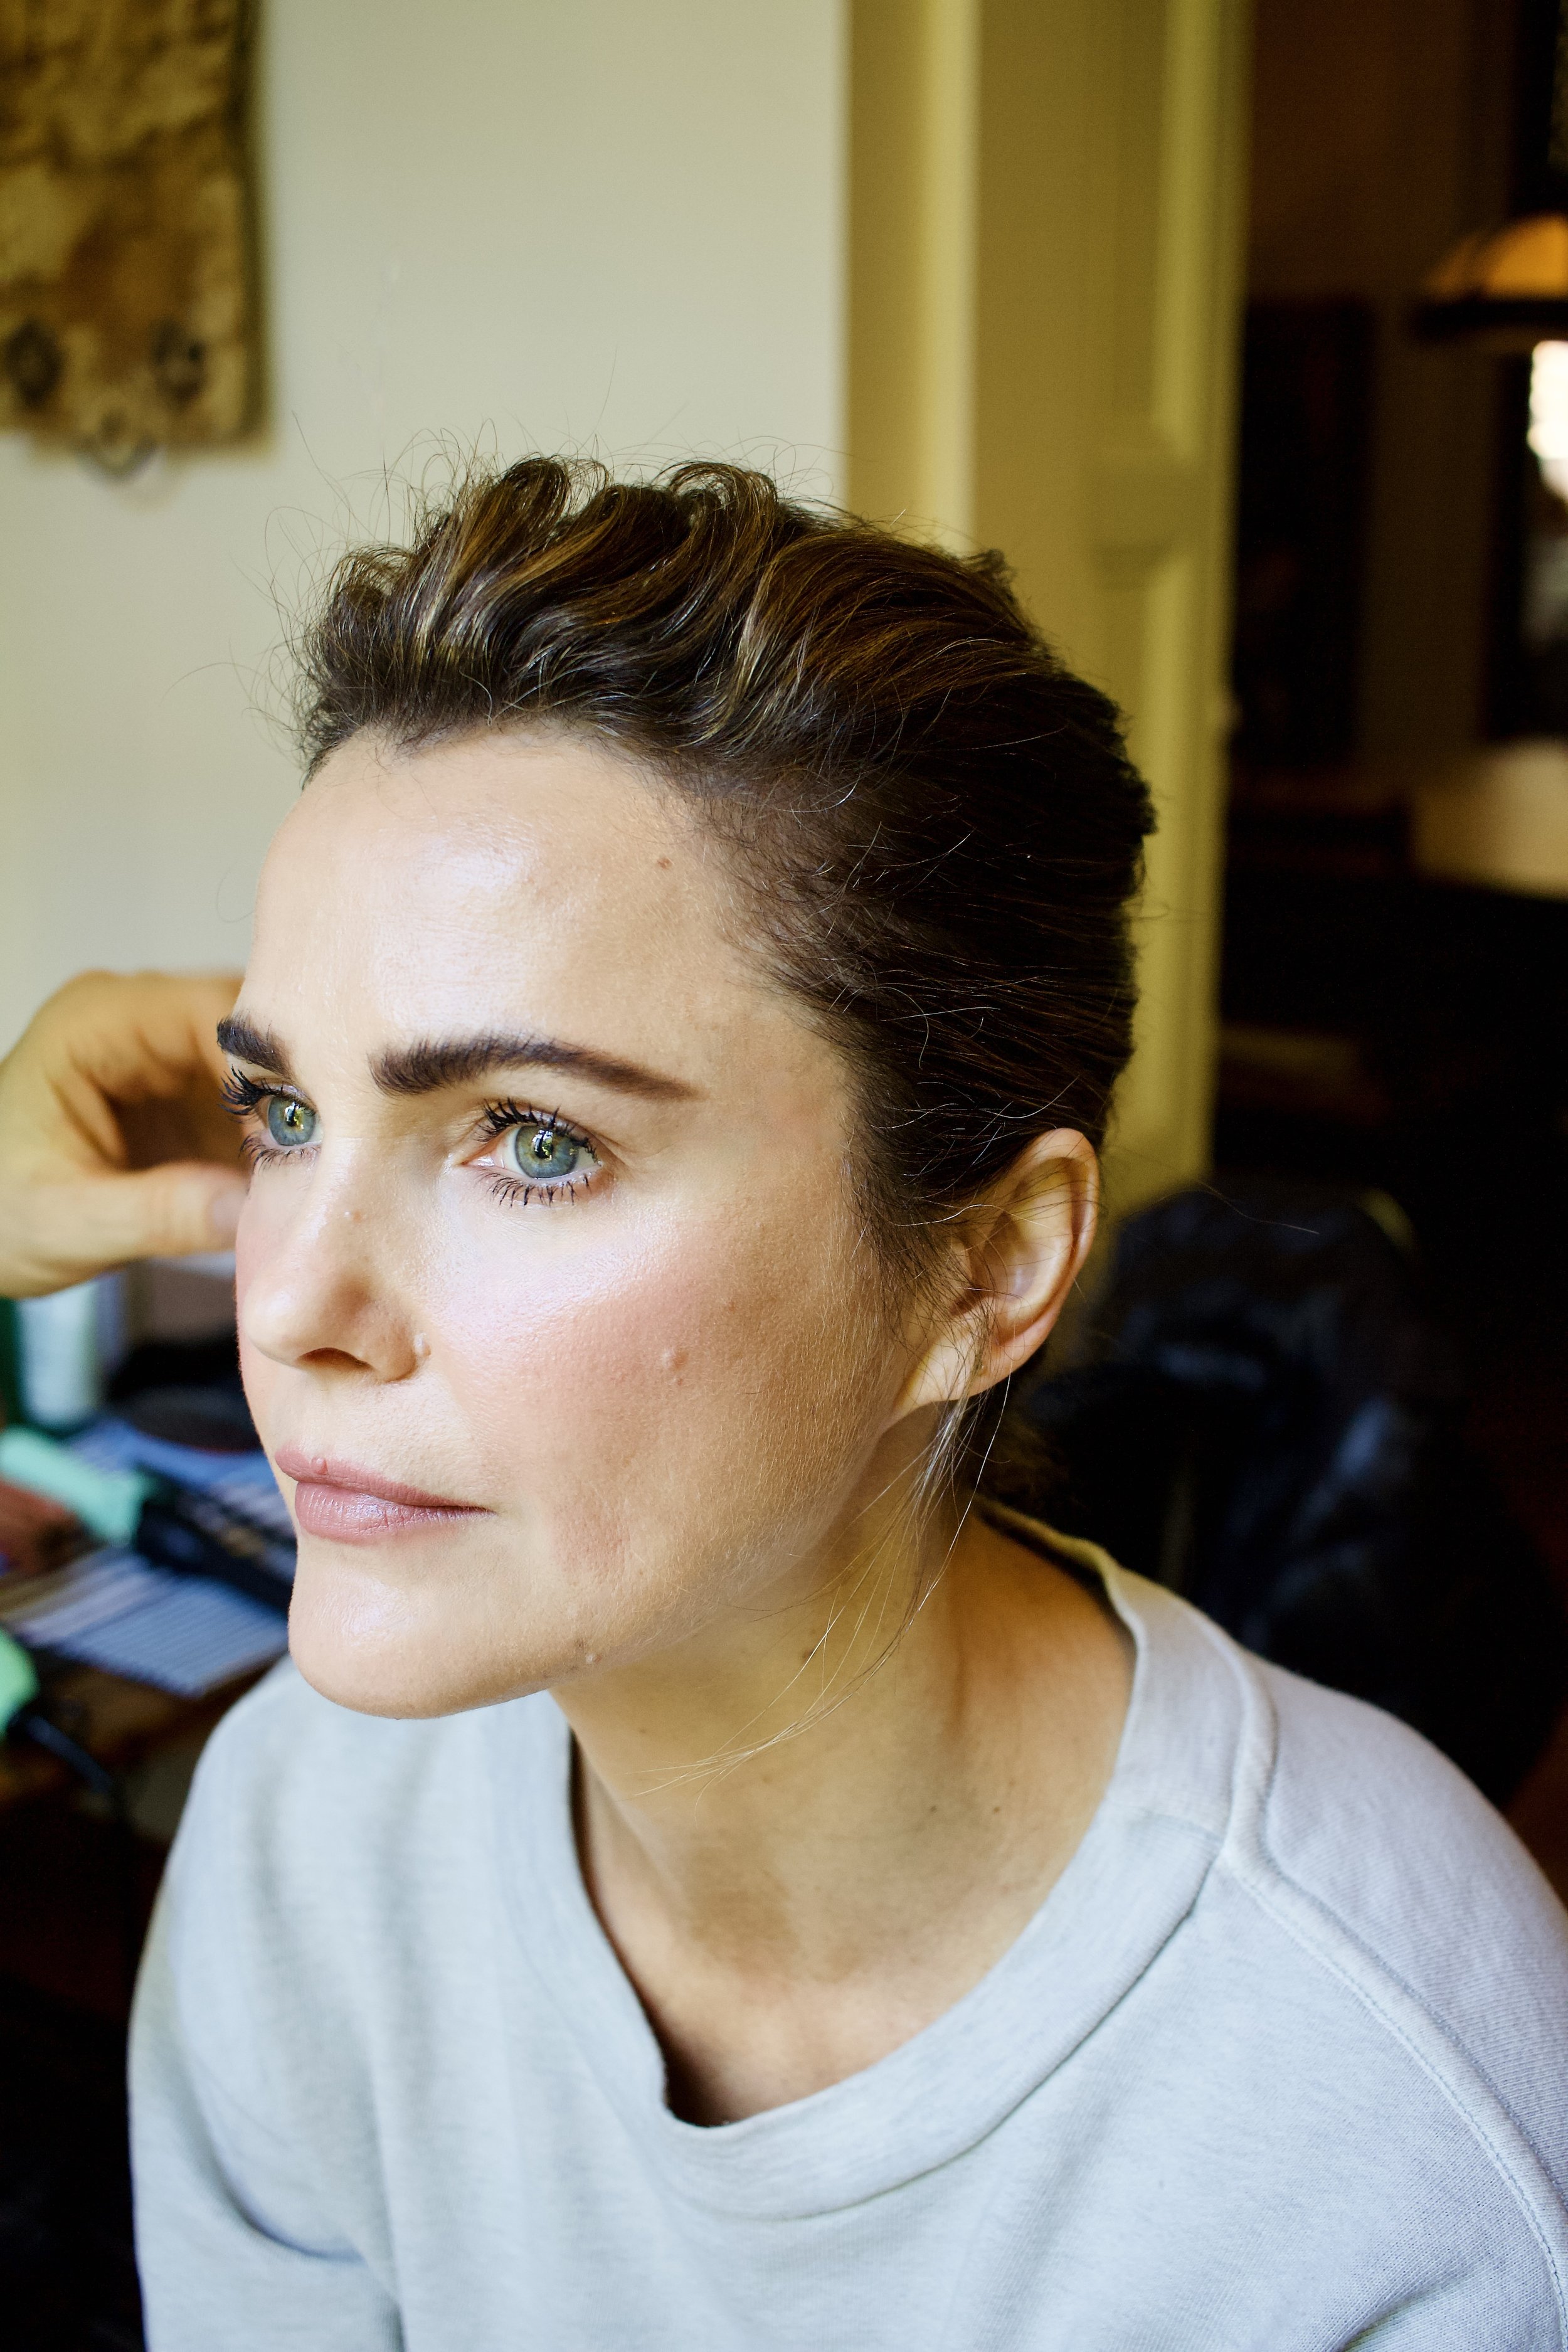 Keri Russell appearance on Late Night with Seth Meyers - Leather